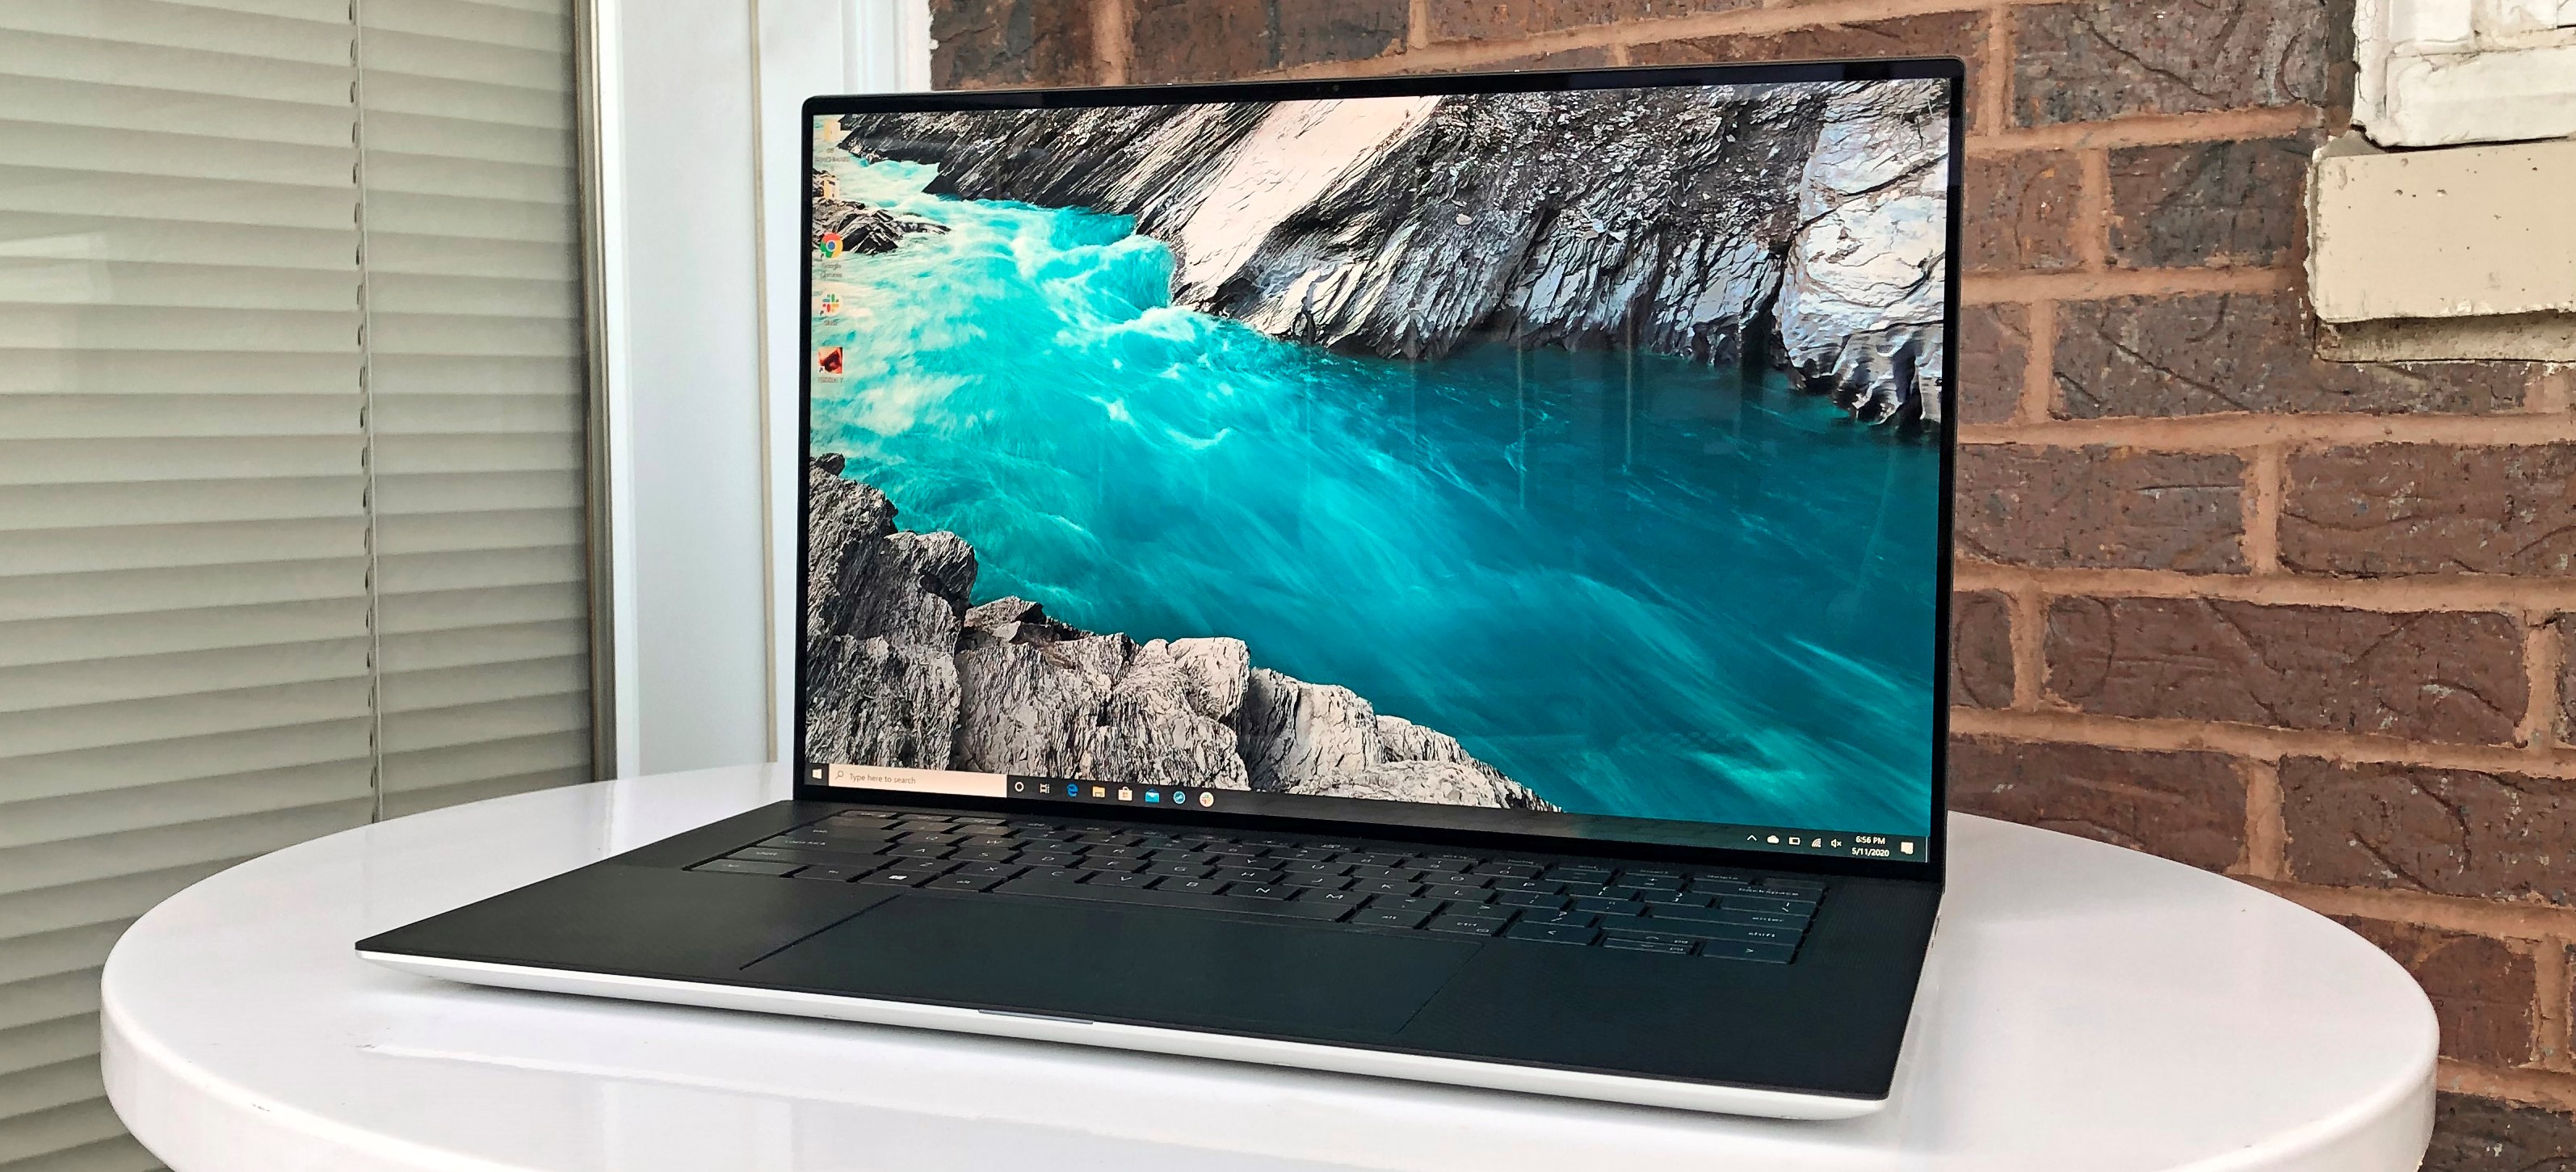 Dell Xps 15 Review Tom S Guide